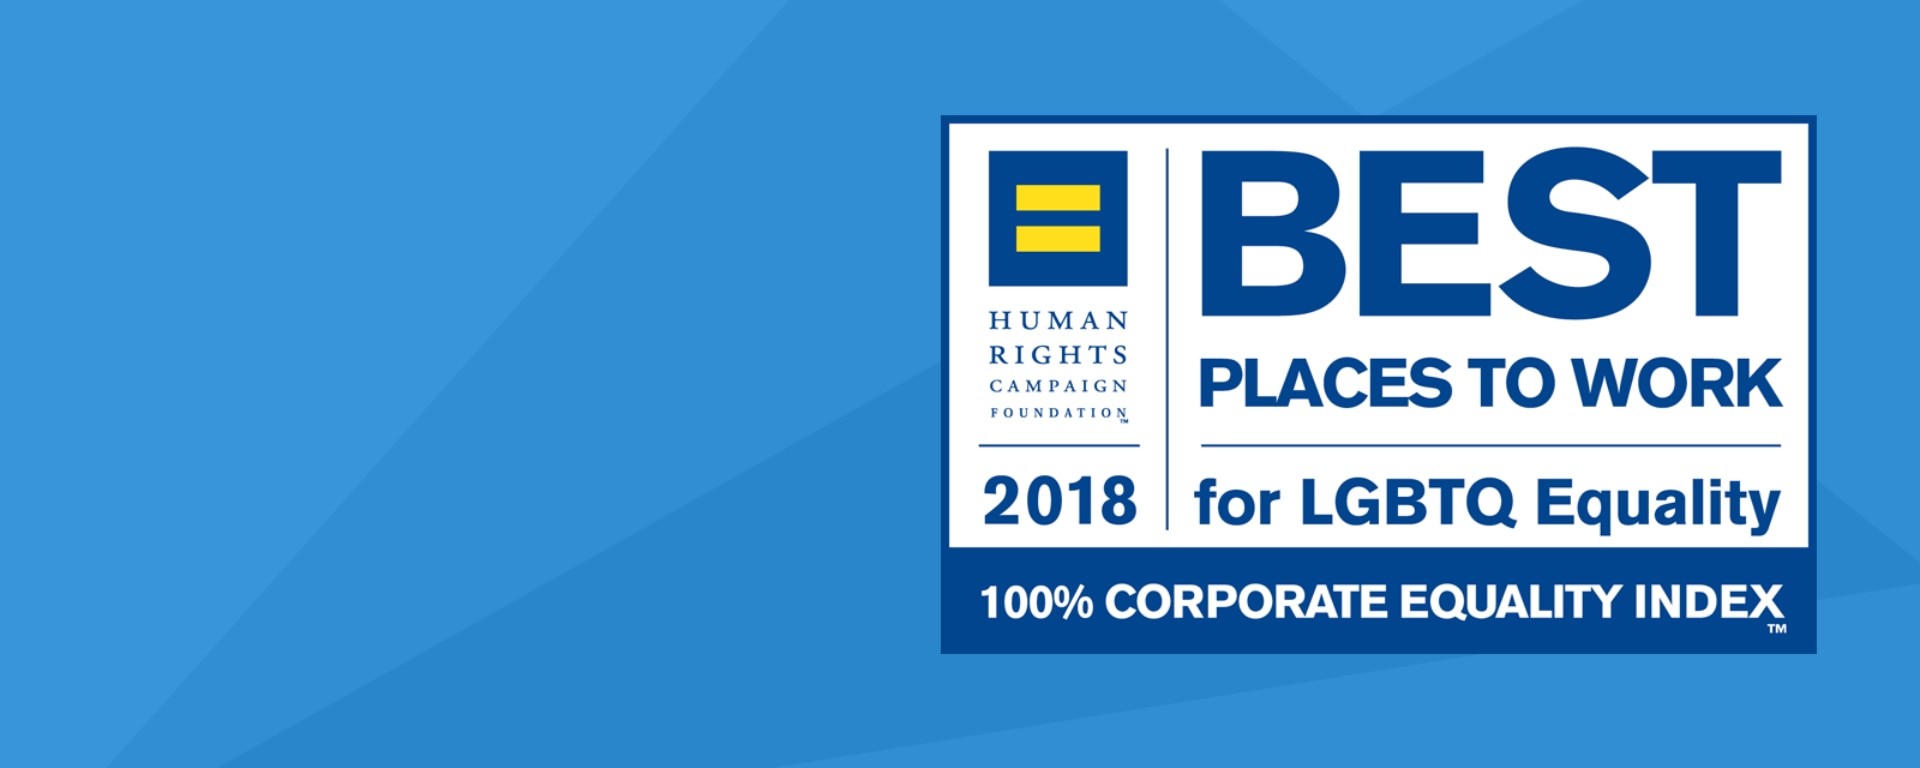 2018-Best-Place-Work-LGBT-Equality-1920x0-c-f